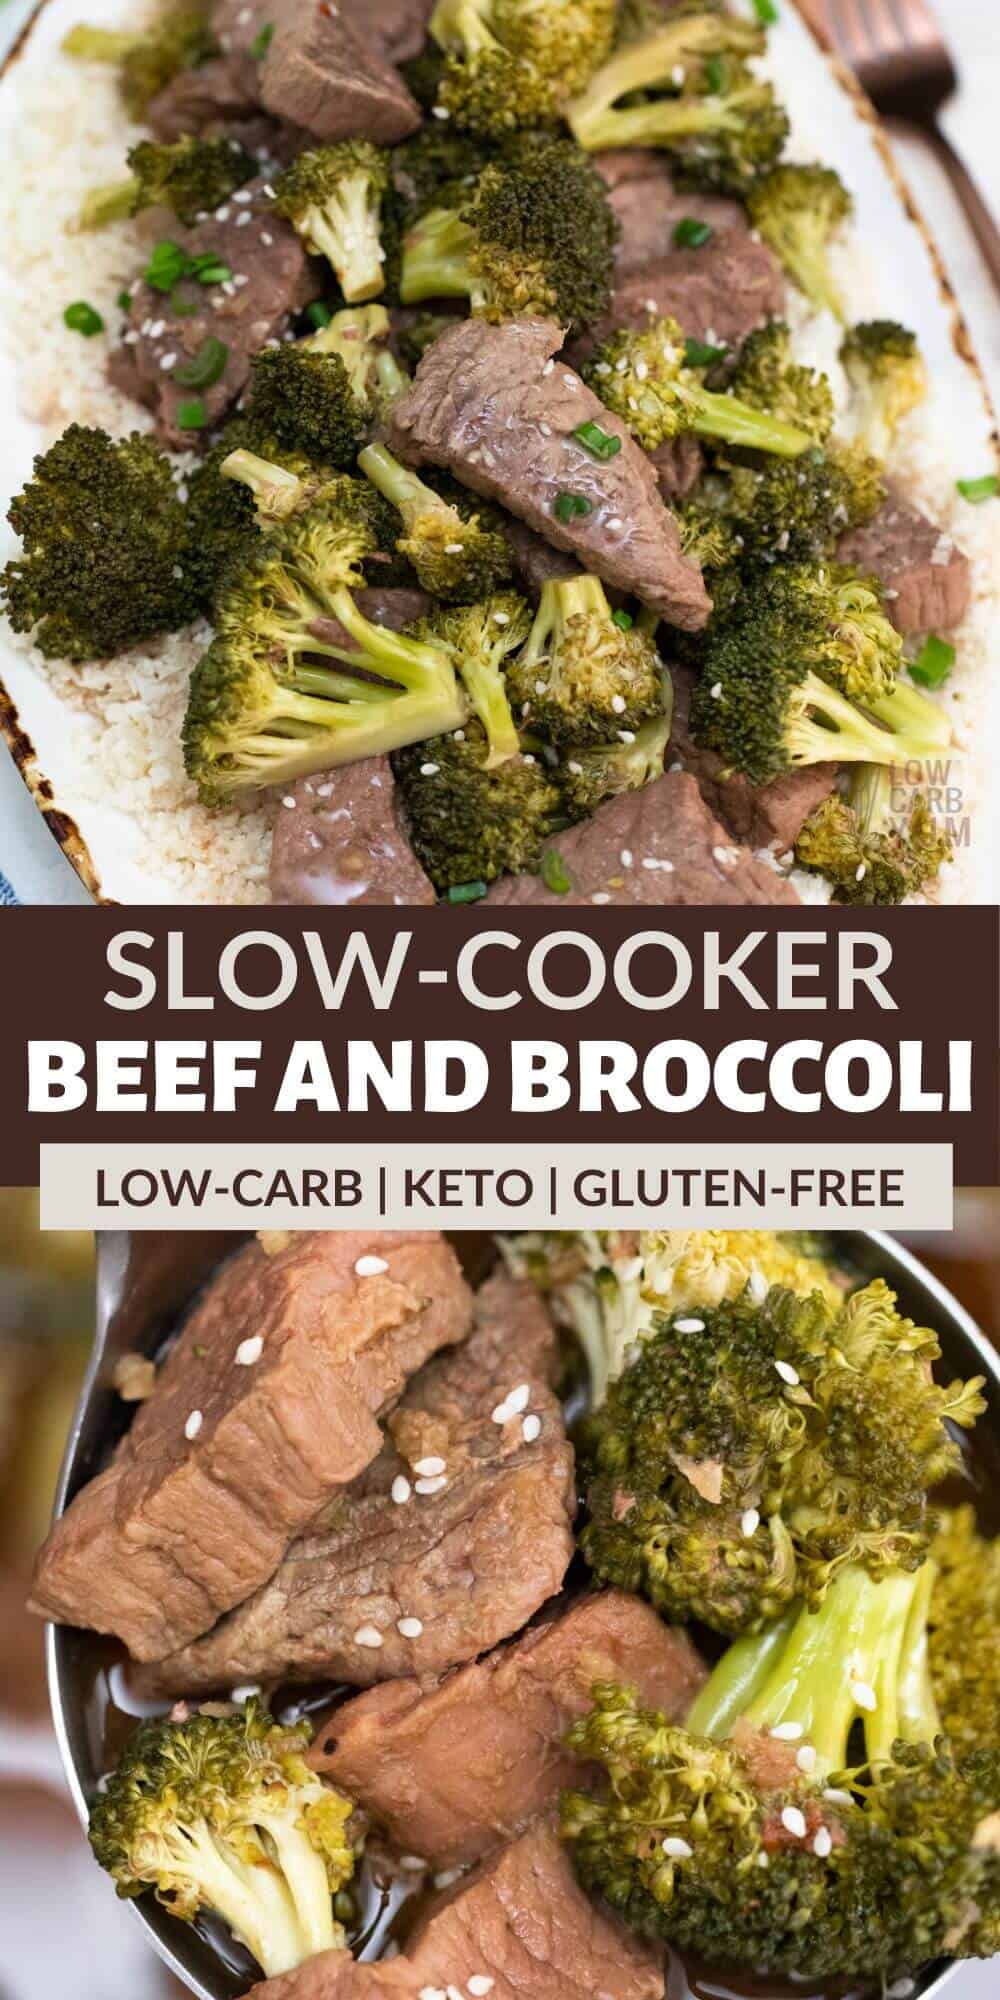 slow cooker beef and broccoli pinterest image.